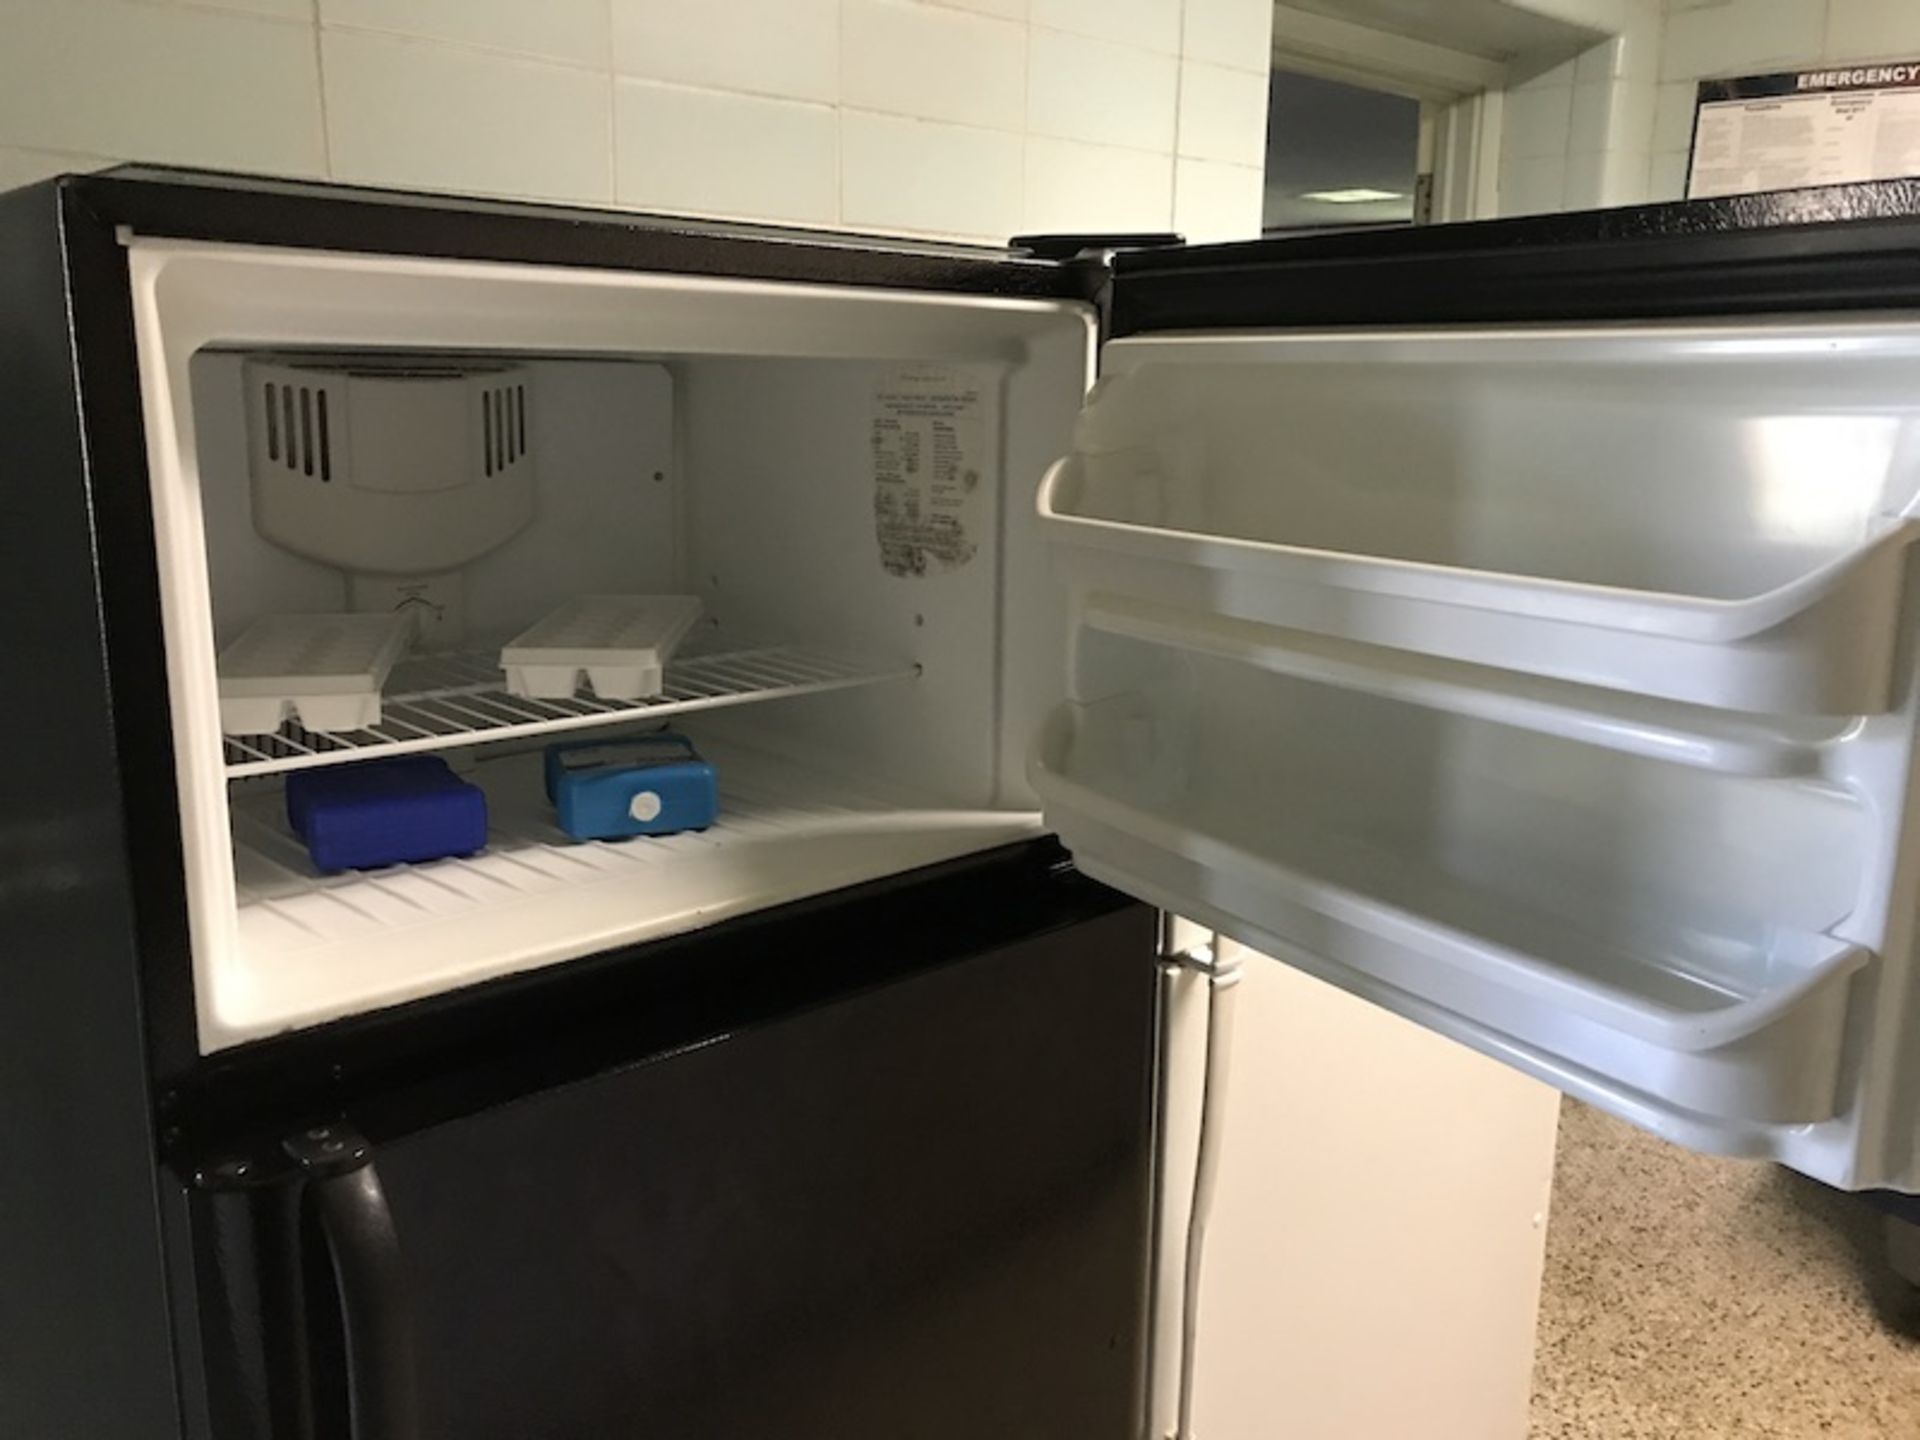 Frigidaire Refrigerator (Faculty Kitchen) - Image 3 of 3